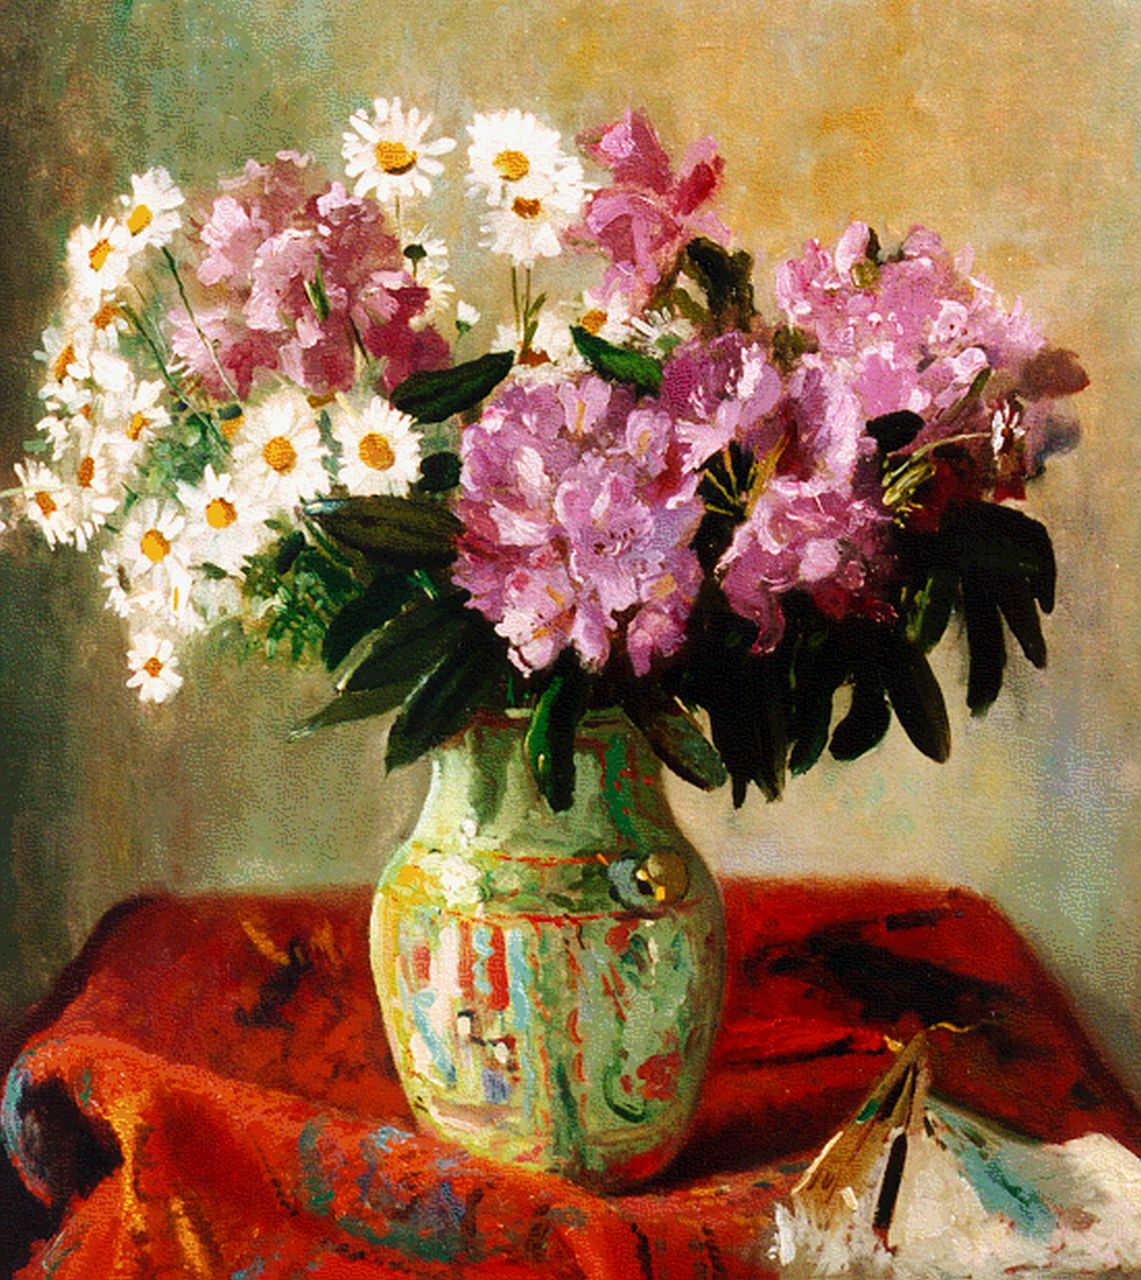 Winter L. de | Louis de Winter, Rhodondendrons and daisies in a vase, oil on canvas 74.0 x 64.0 cm, signed l.r.